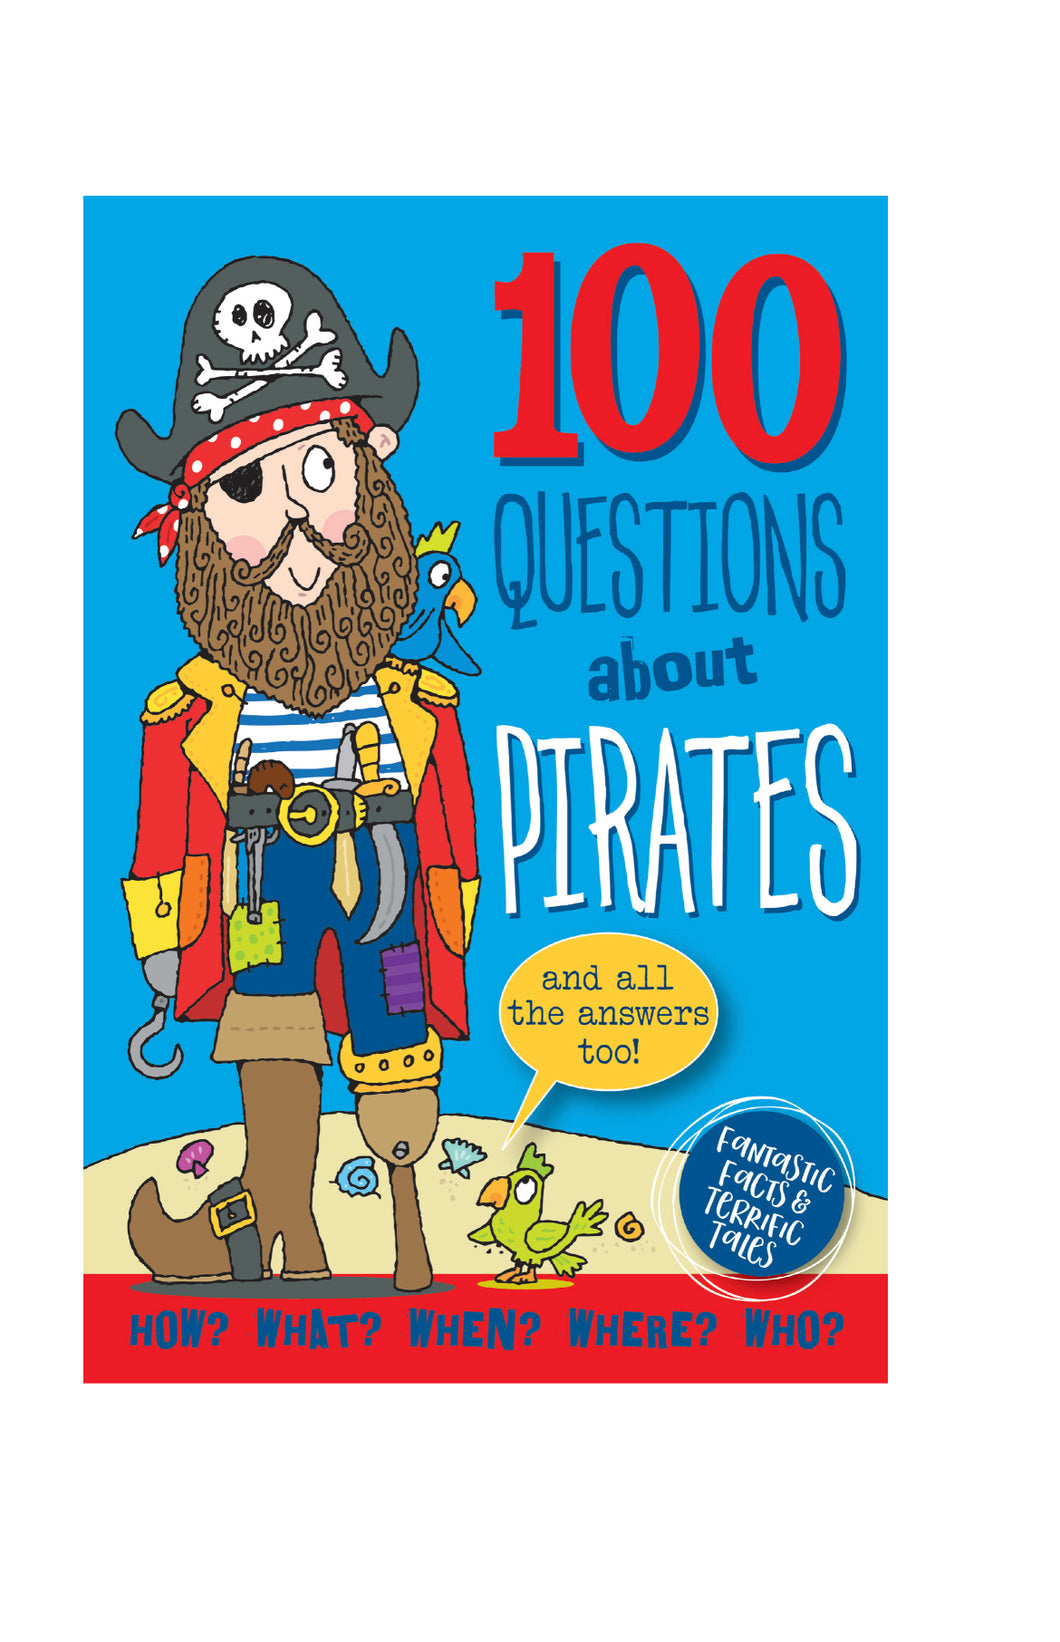 100 Questions about Pirates trivia book for kids